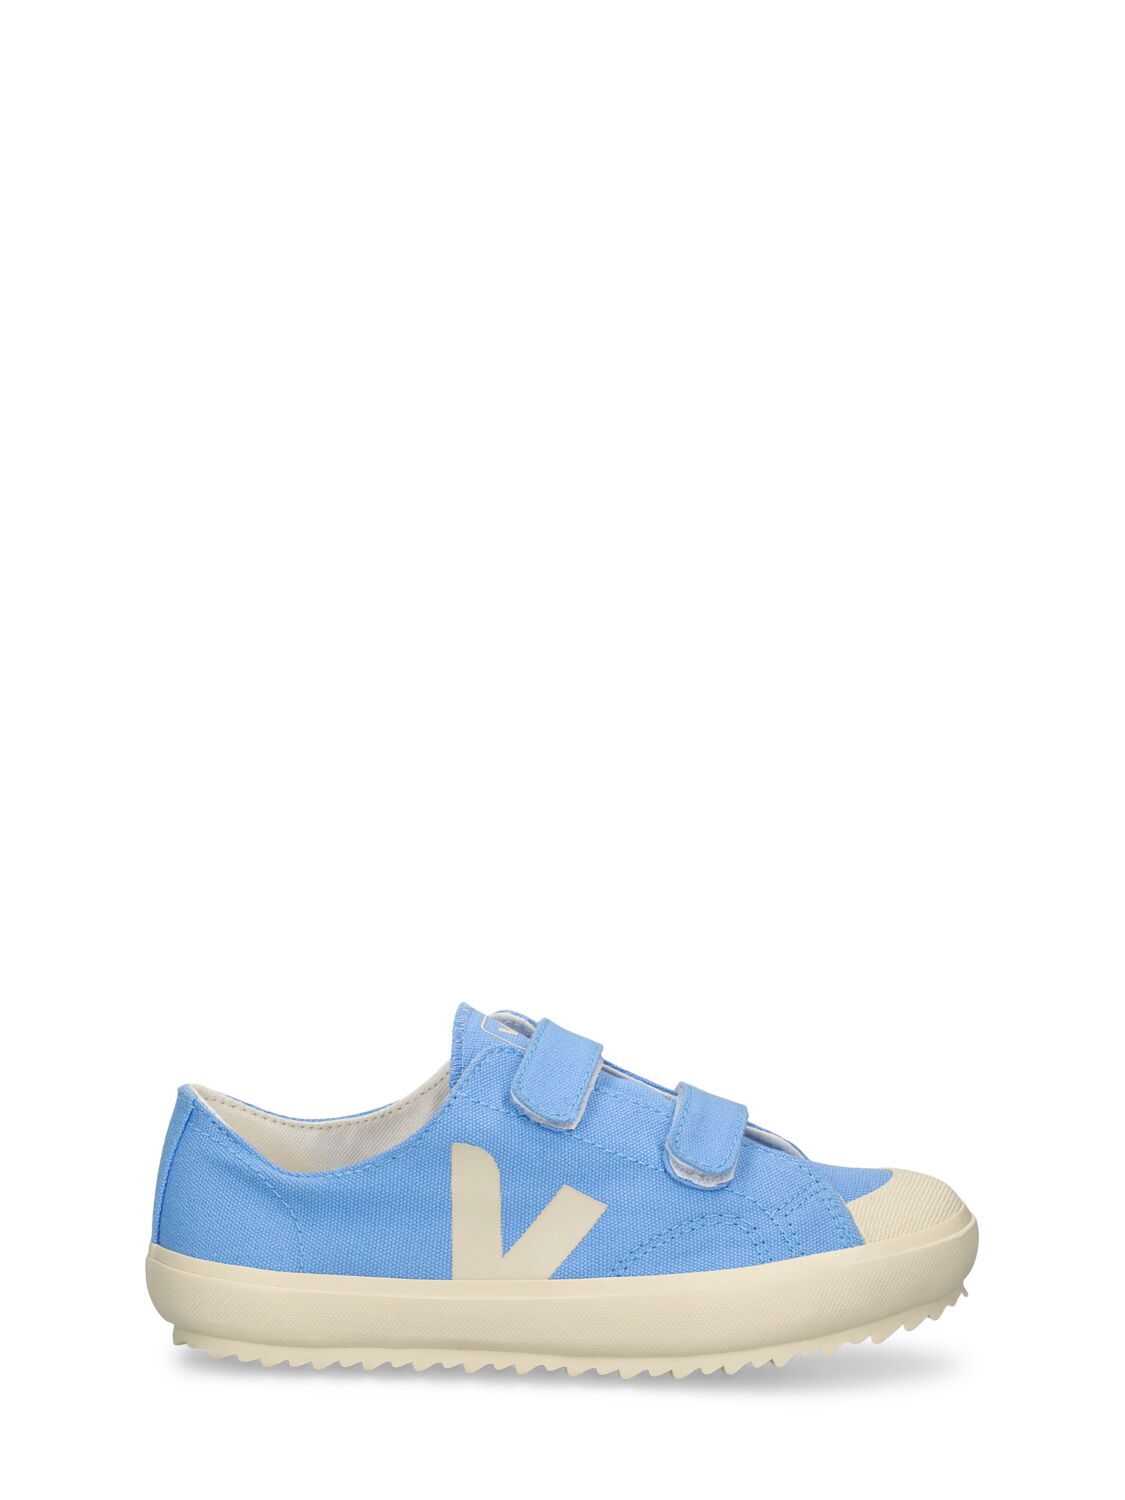 Veja Kids' Ollie Cotton Canvas Strap Sneakers In Light Blue